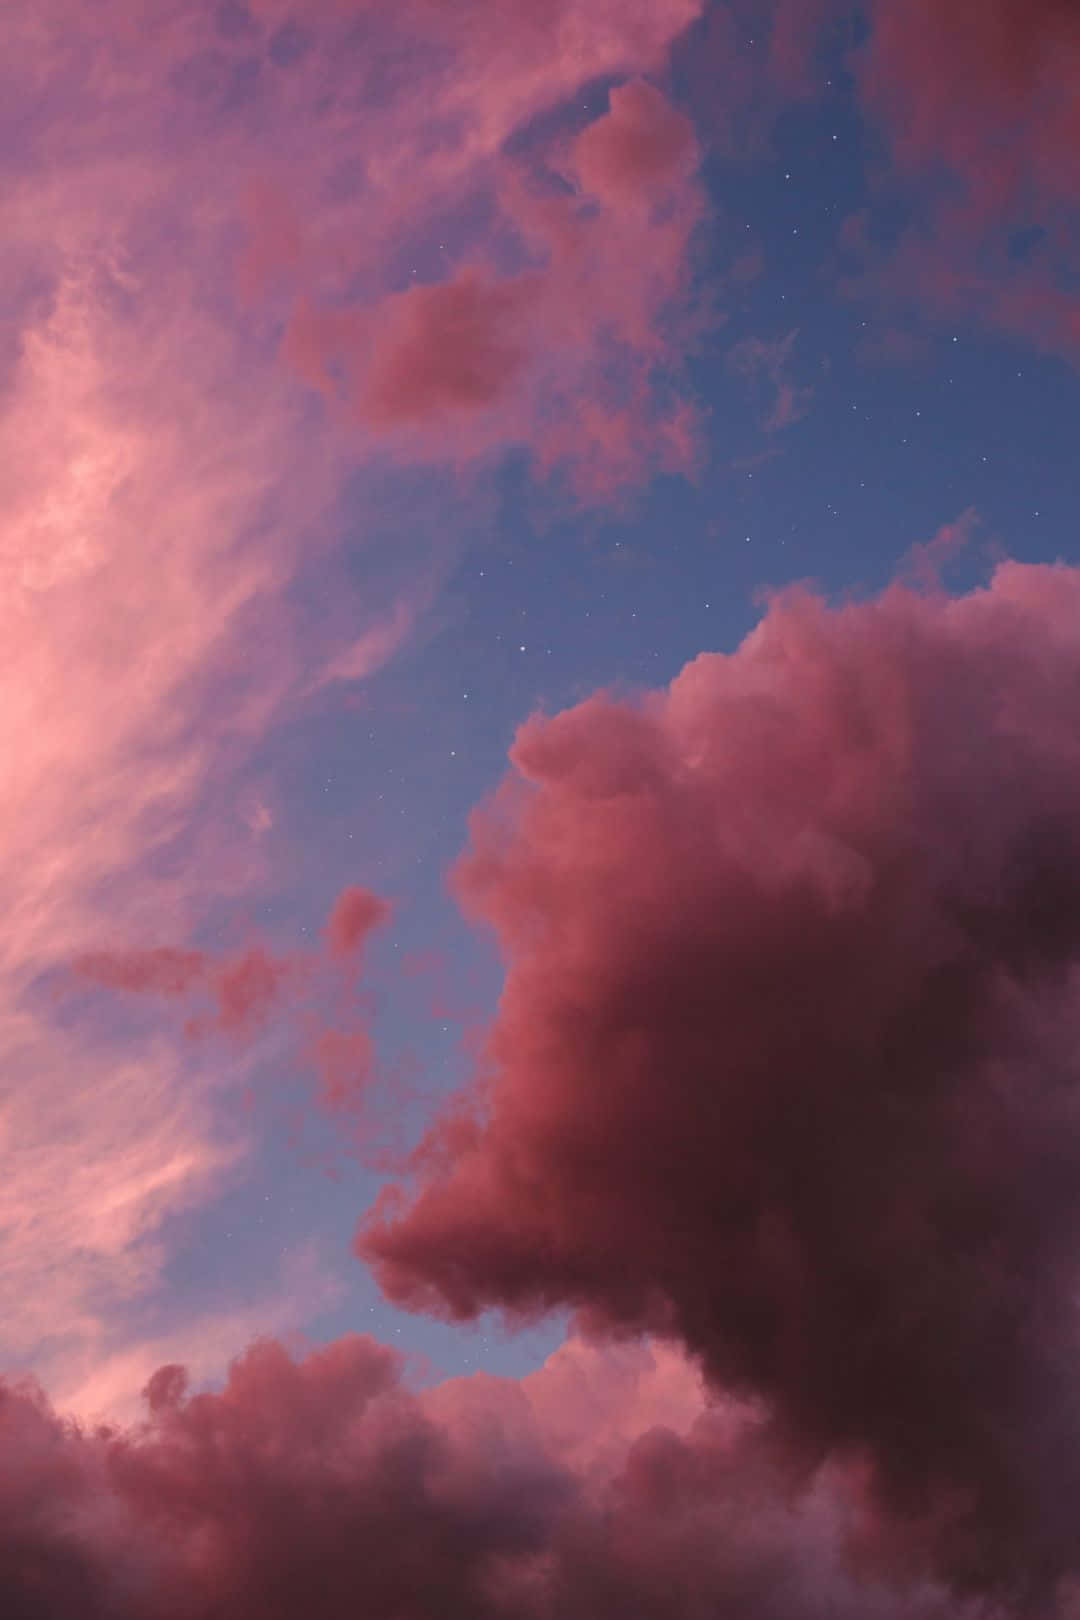 A Pink Sky With Clouds And Stars